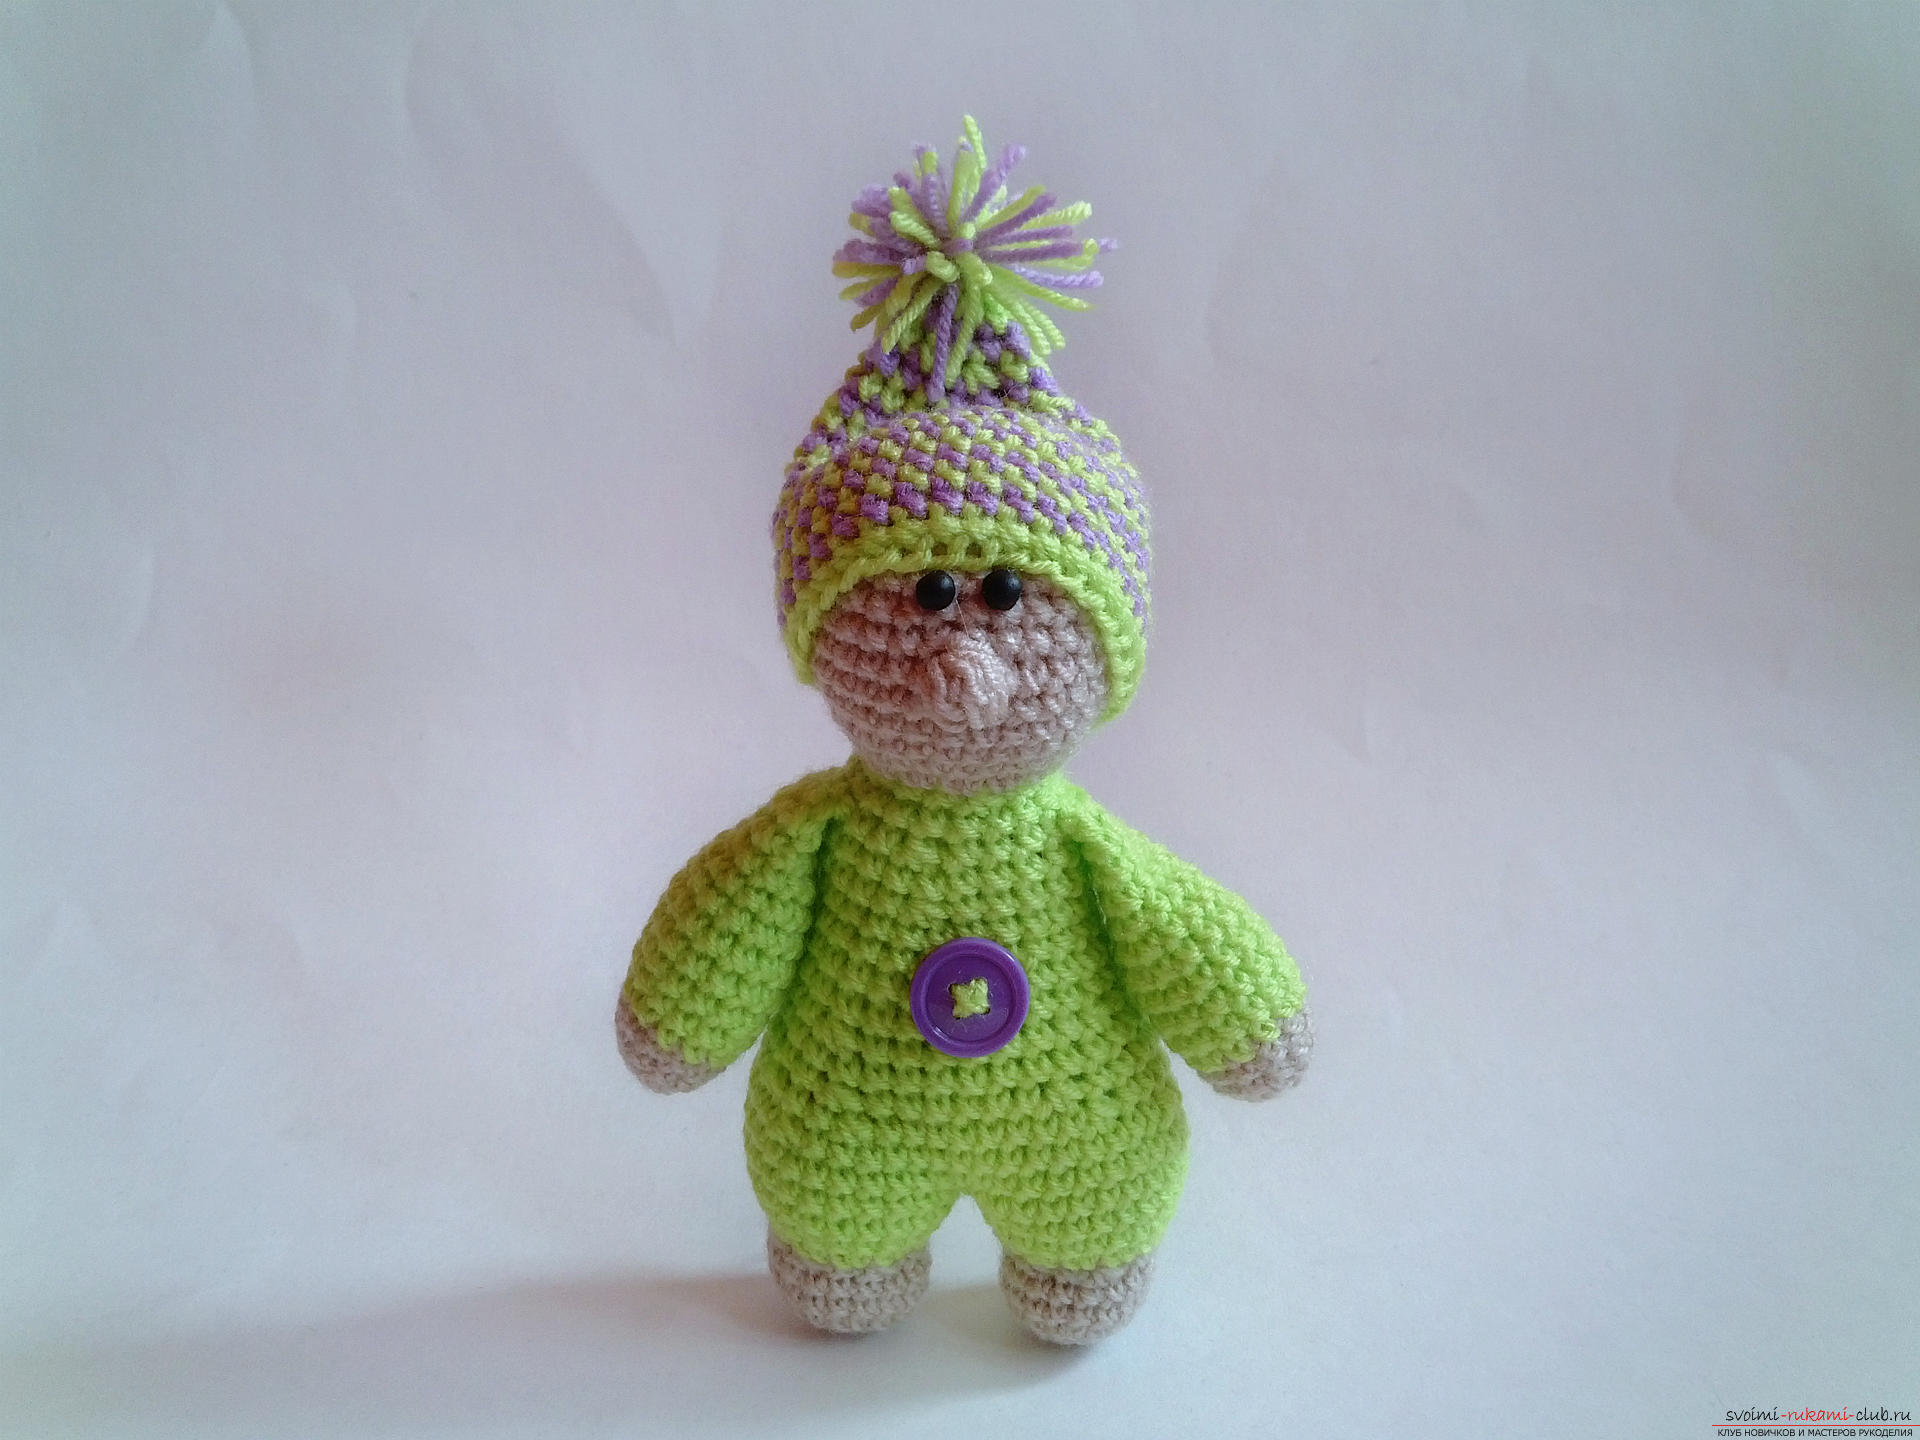 A master class with a photo and description will teach you how to tie a crocheted dwarf toy. Photo №1